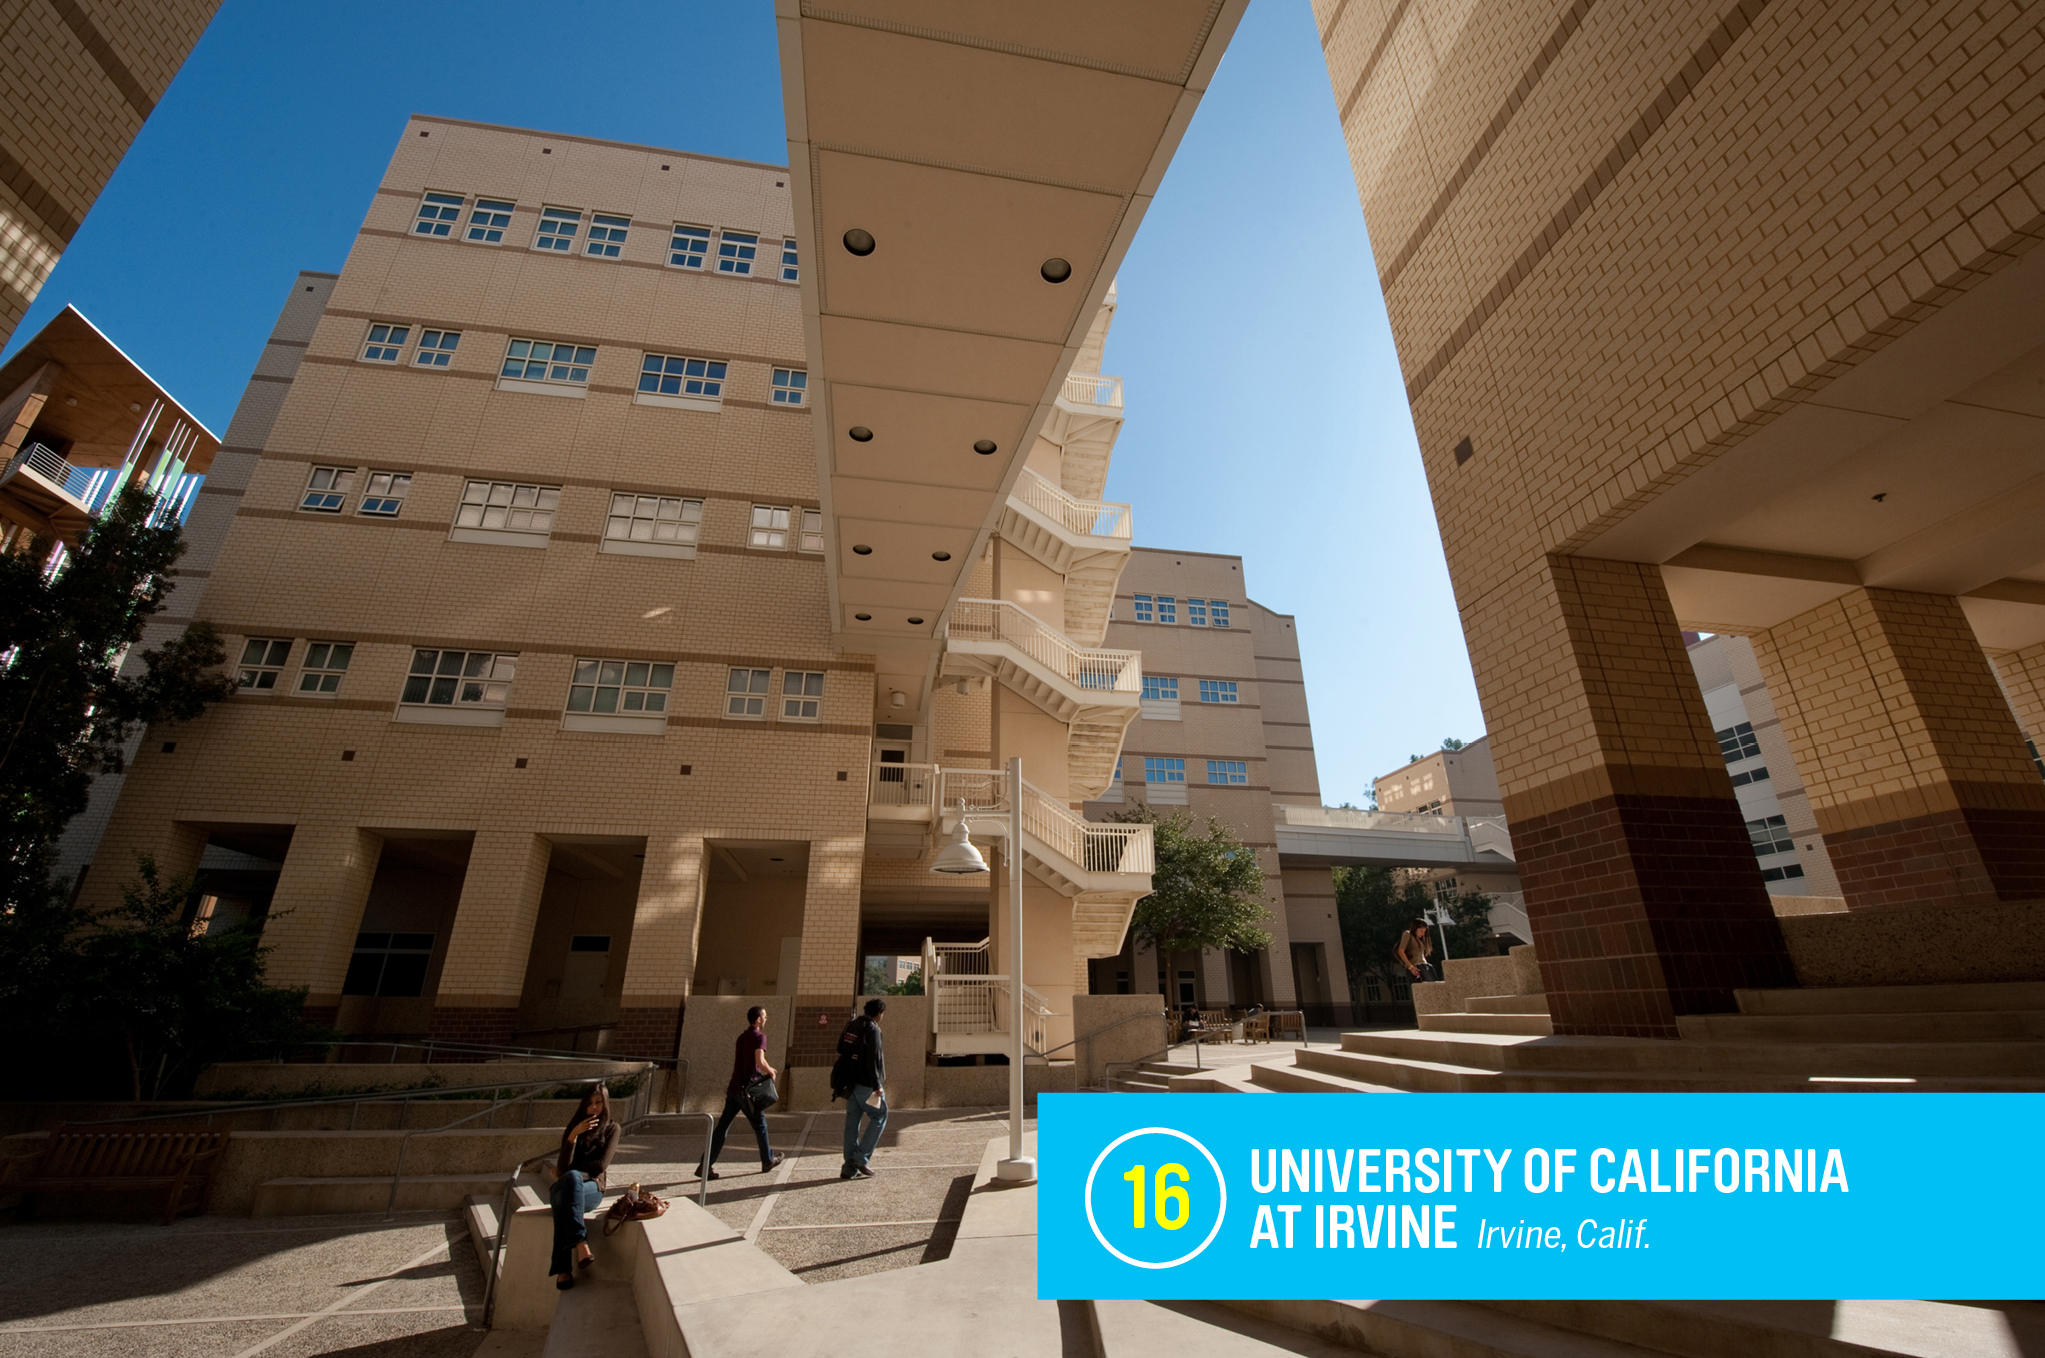 <a href="https://money.com/best-colleges/profile/university-of-california-irvine/" target="_blank">UC-Irvine</a> shines in serving one of the most diverse student bodies in the country: More than 40% of students come from low-income families. Yet the school still boasts an 86% graduation rate—an impressive 41% higher than similar colleges. <a href="https://money.com/best-colleges/profile/university-of-california-irvine/" target="_blank">FULL PROFILE</a>